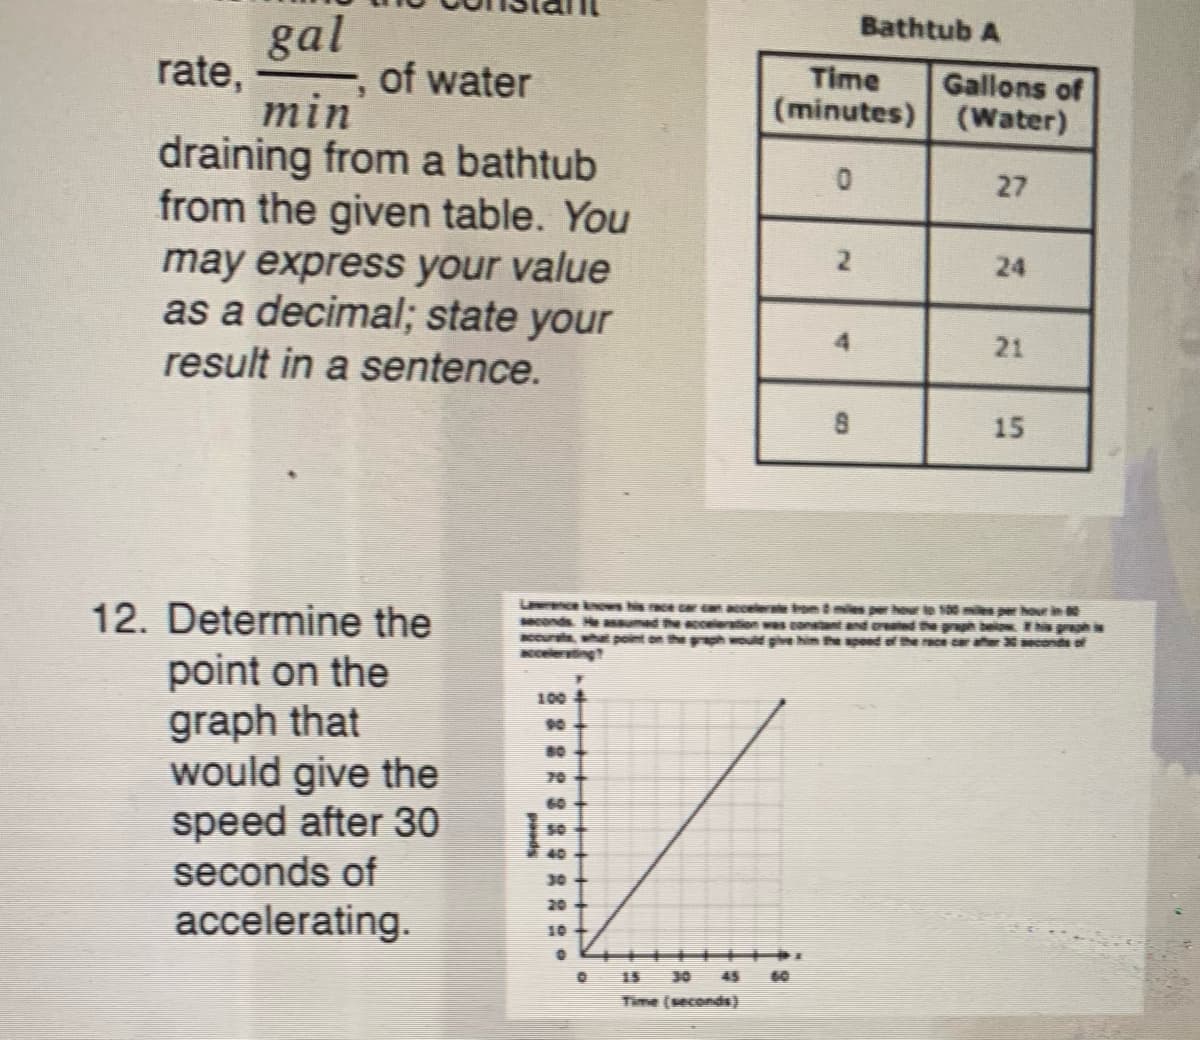 gal
rate,
min
draining from a bathtub
from the given table. You
Bathtub A
of water
Time
(minutes) (Water)
Gallons of
27
may express your value
as a decimal; state your
result in a sentence.
24
21
15
Lawence kncws his race car can acceler rom miles per ho
onds. He asuned the acceiertion was contant and oreatd the grph belo Fhs praph
ceurt, what point
Kceleting?
12. Determine the
point on the
graph that
would give the
speed after 30
seconds of
pve him the apod of N arater nds of
100 4
90
80
70
60
40
30
20
accelerating.
10
15
30
45
60
Time (seconds)
Speed
